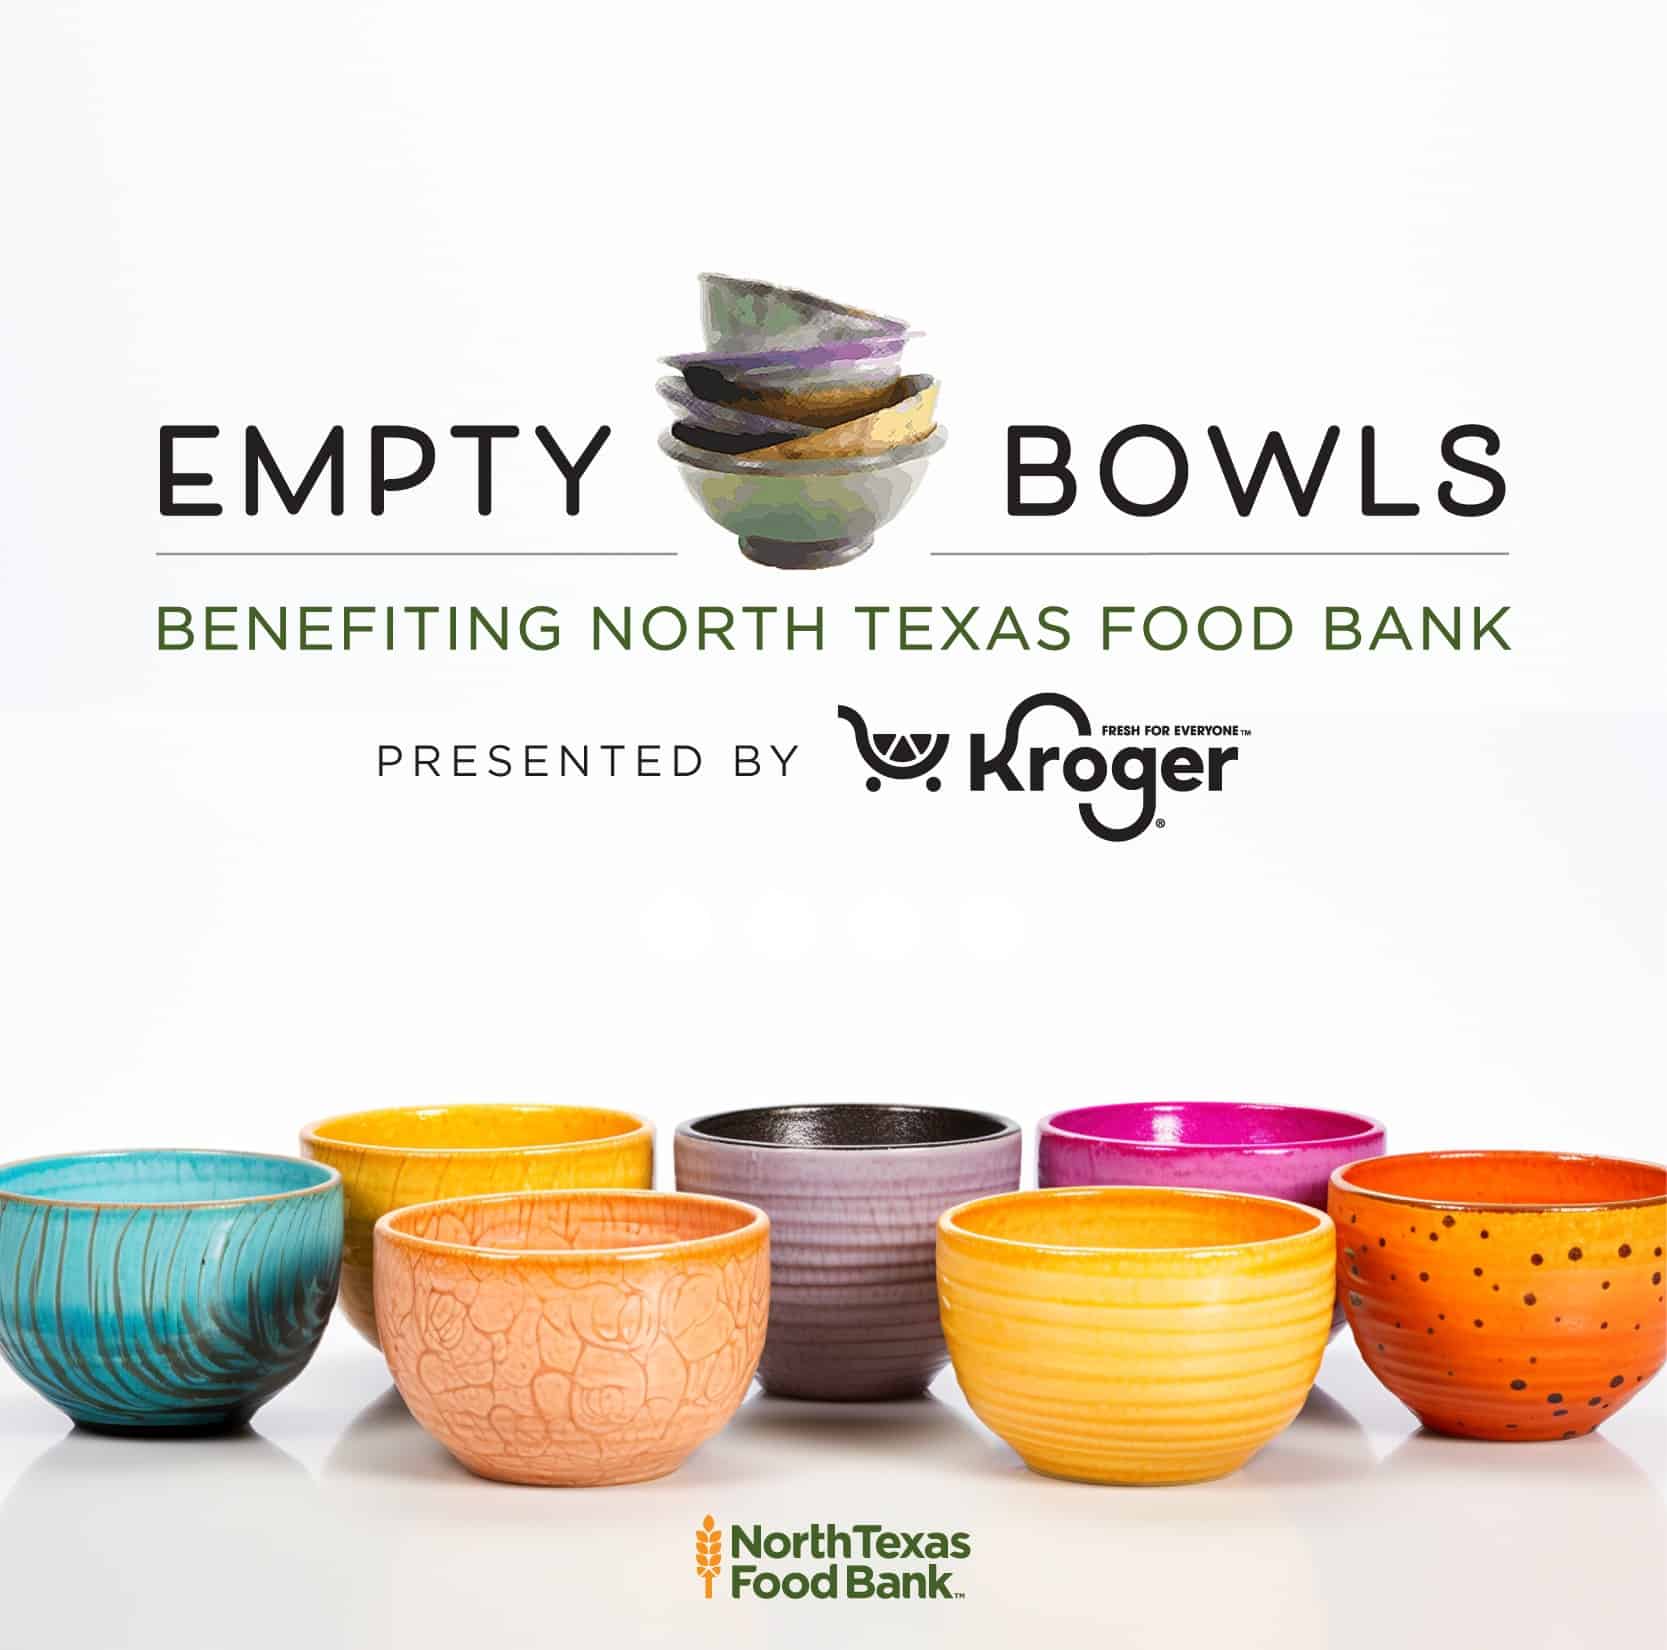 Empty Bowls Event Graphic Featuring Colorful Bows. Presented by Kroger